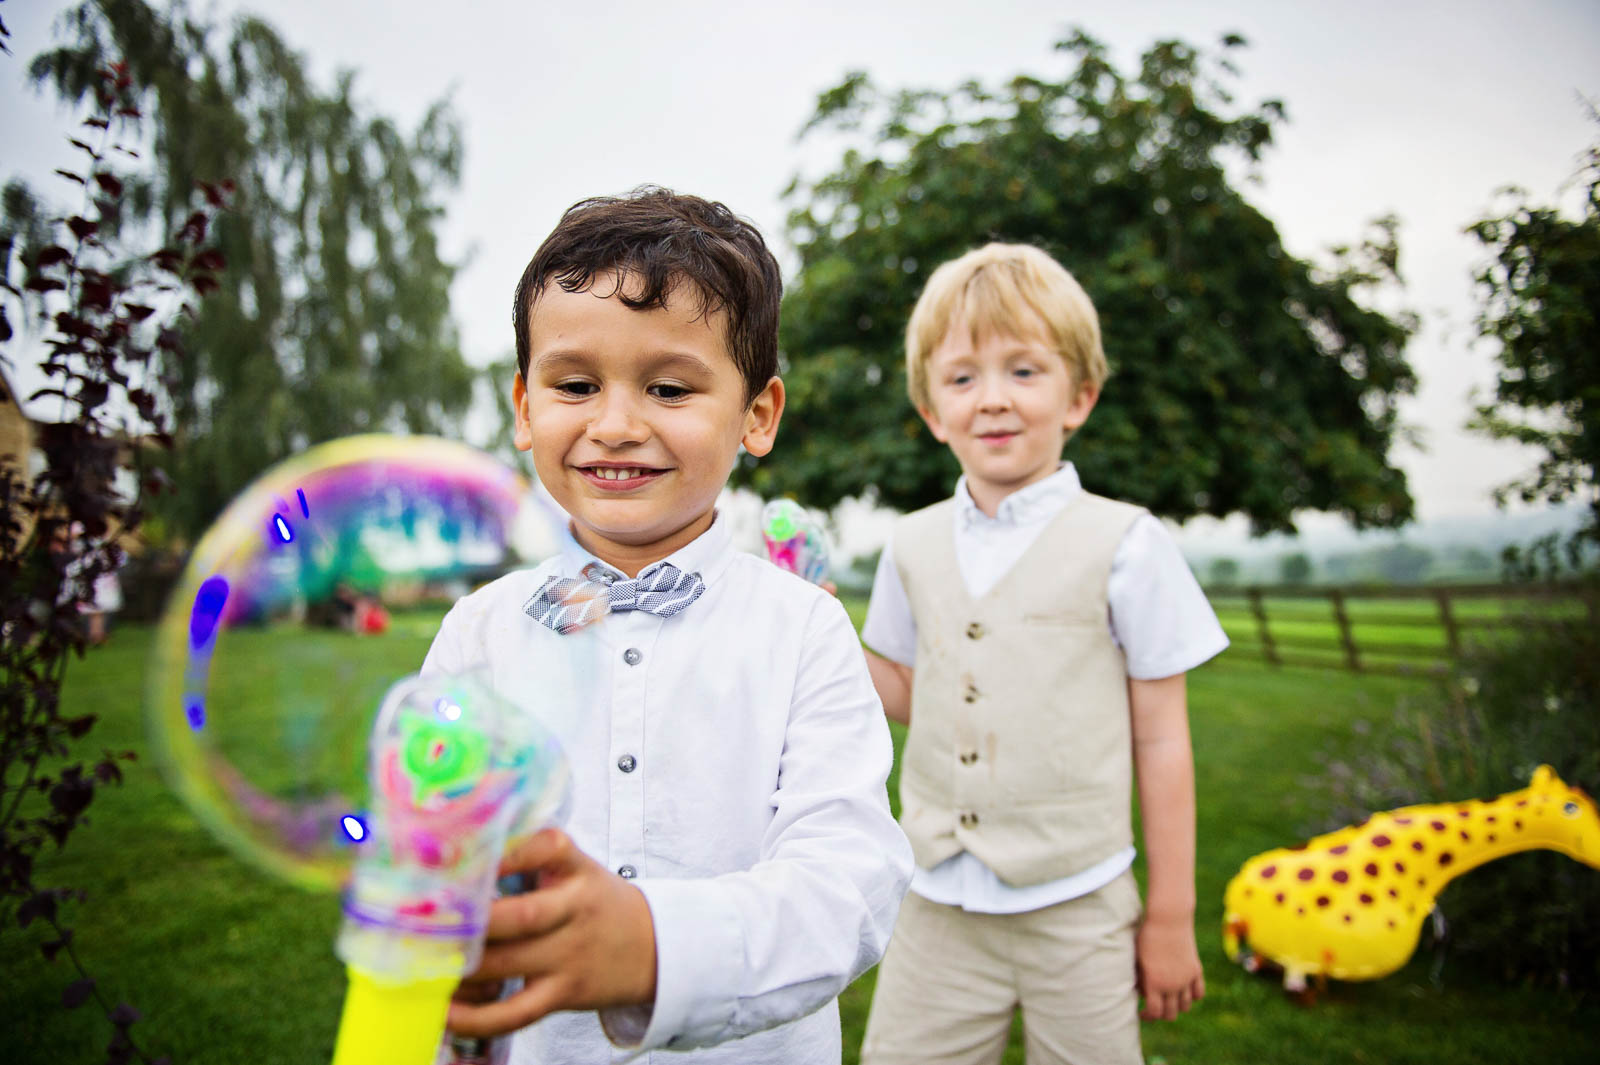 Children paying with bubbles at a wedding